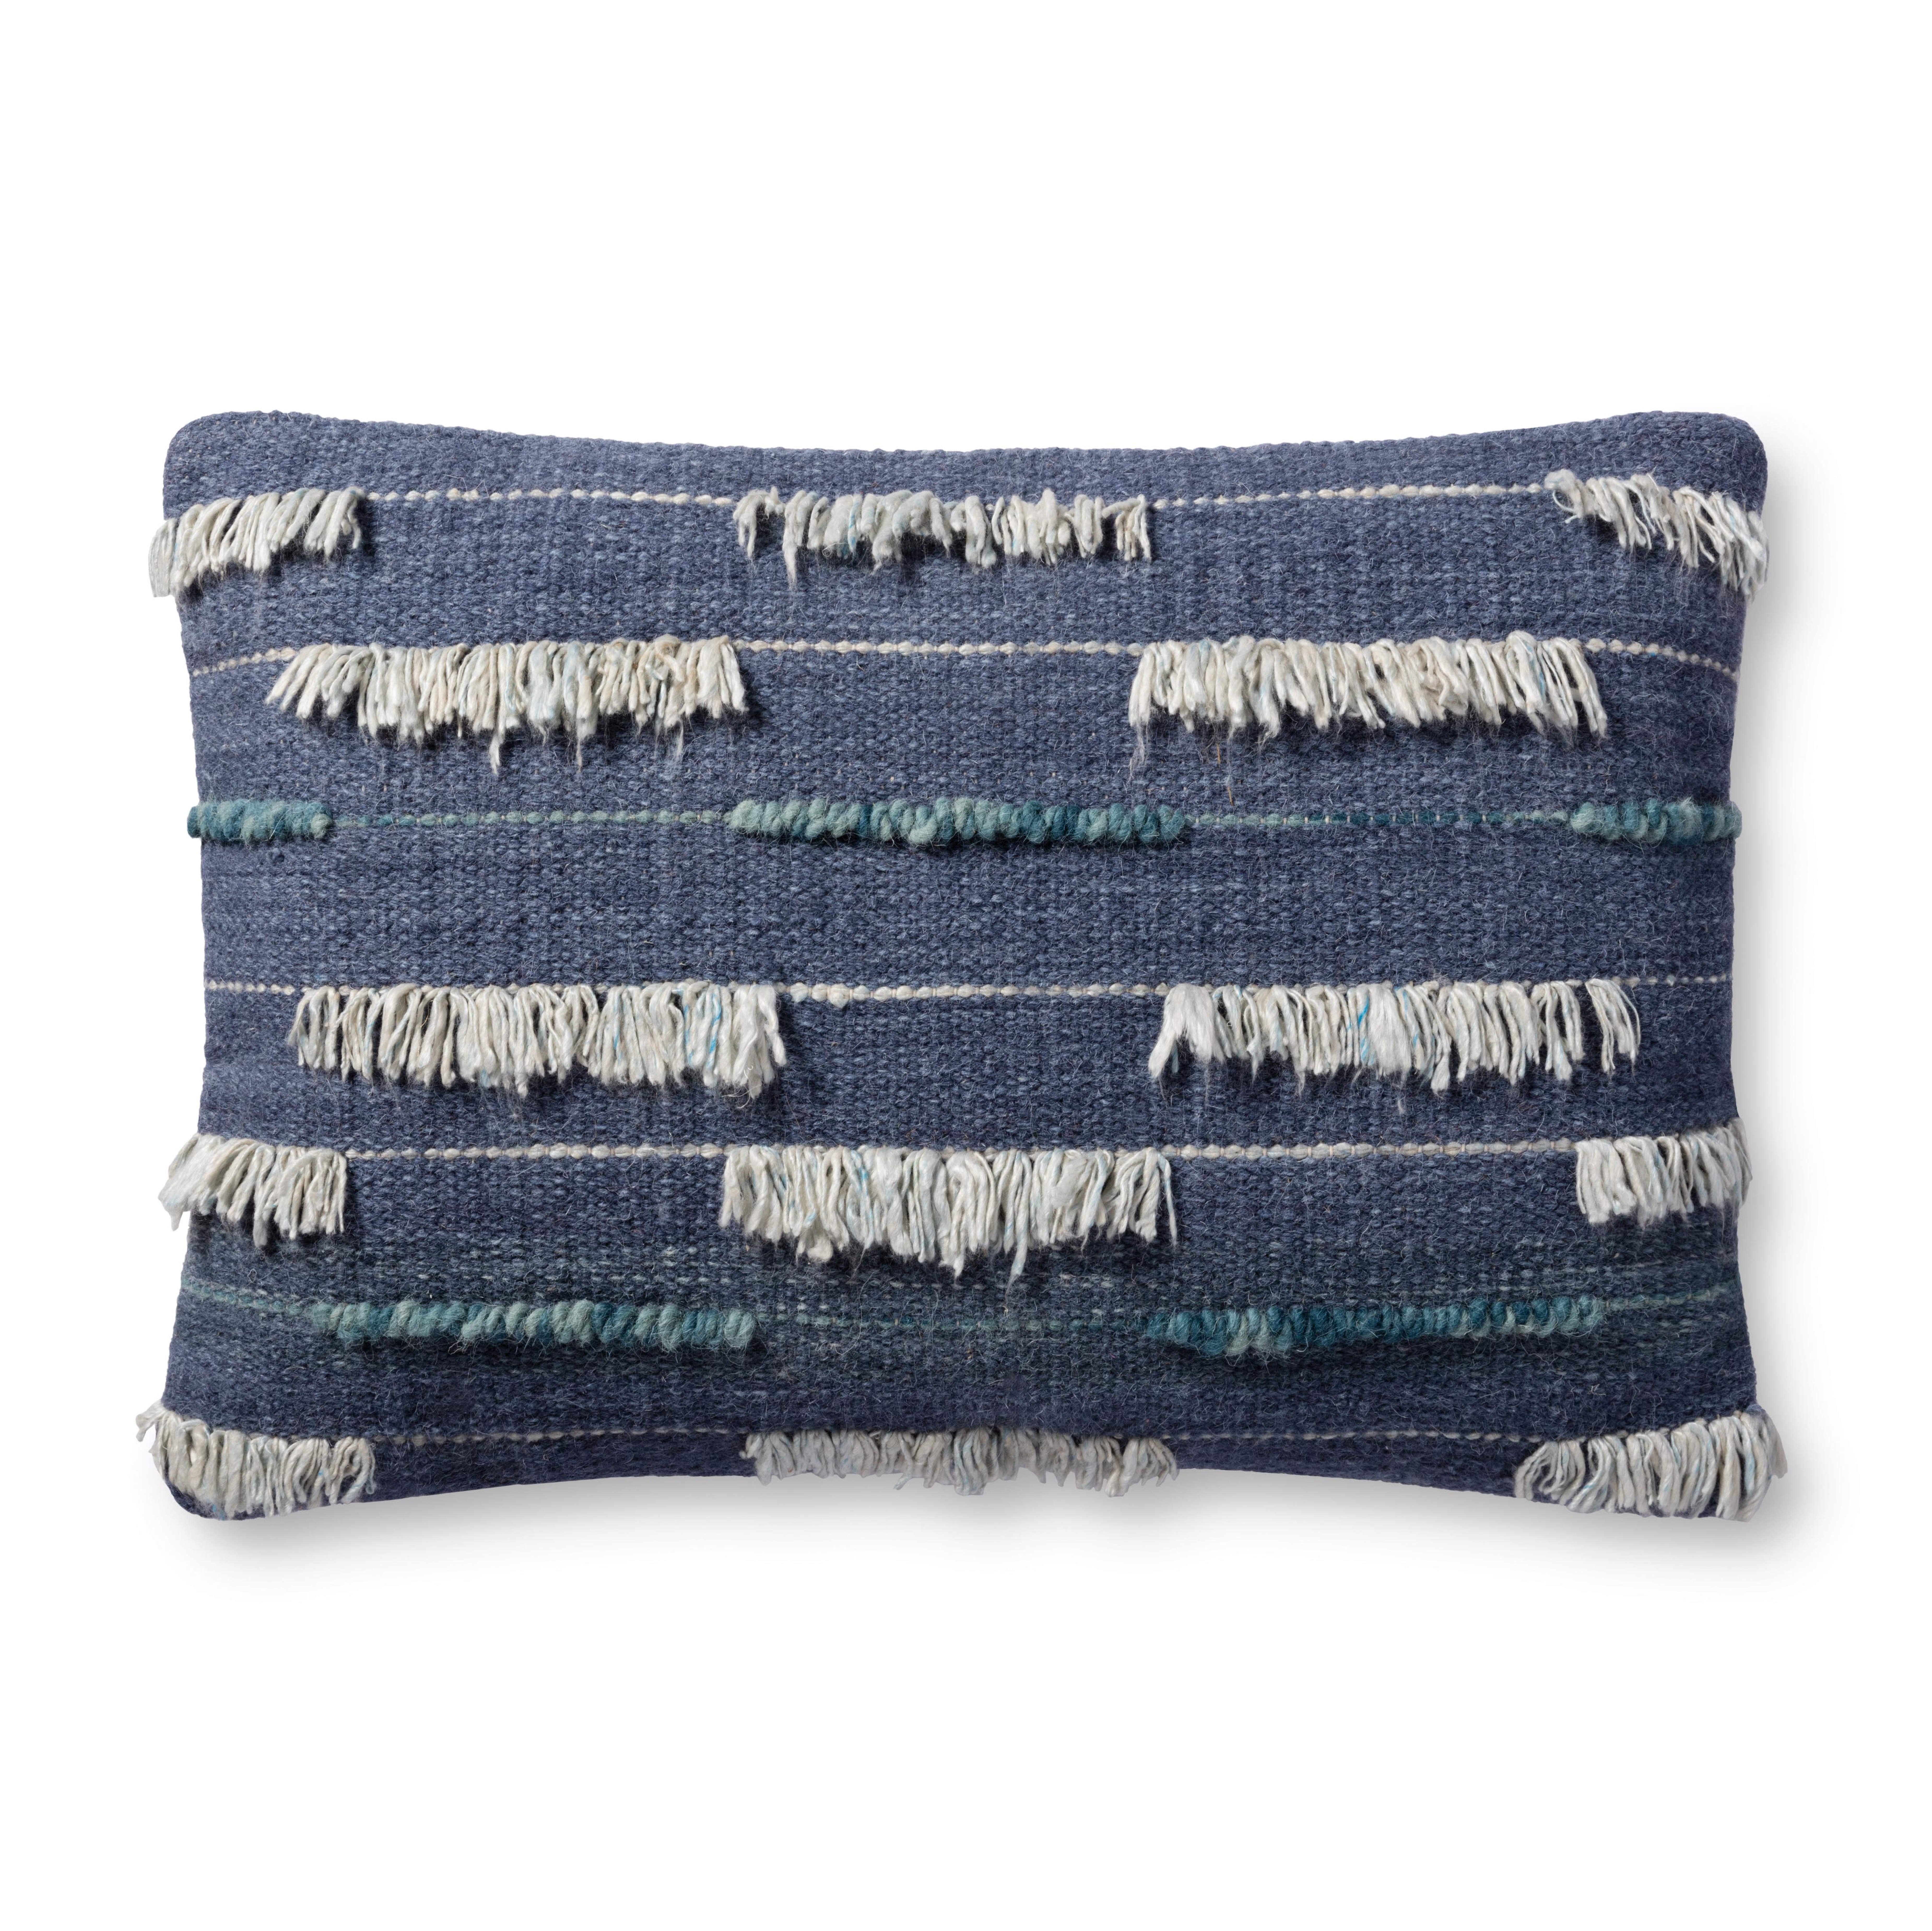 PILLOWS P4136 INDIGO / IVORY 16" x 26" Cover w/Down - ED Ellen DeGeneres Crafted by Loloi Rugs